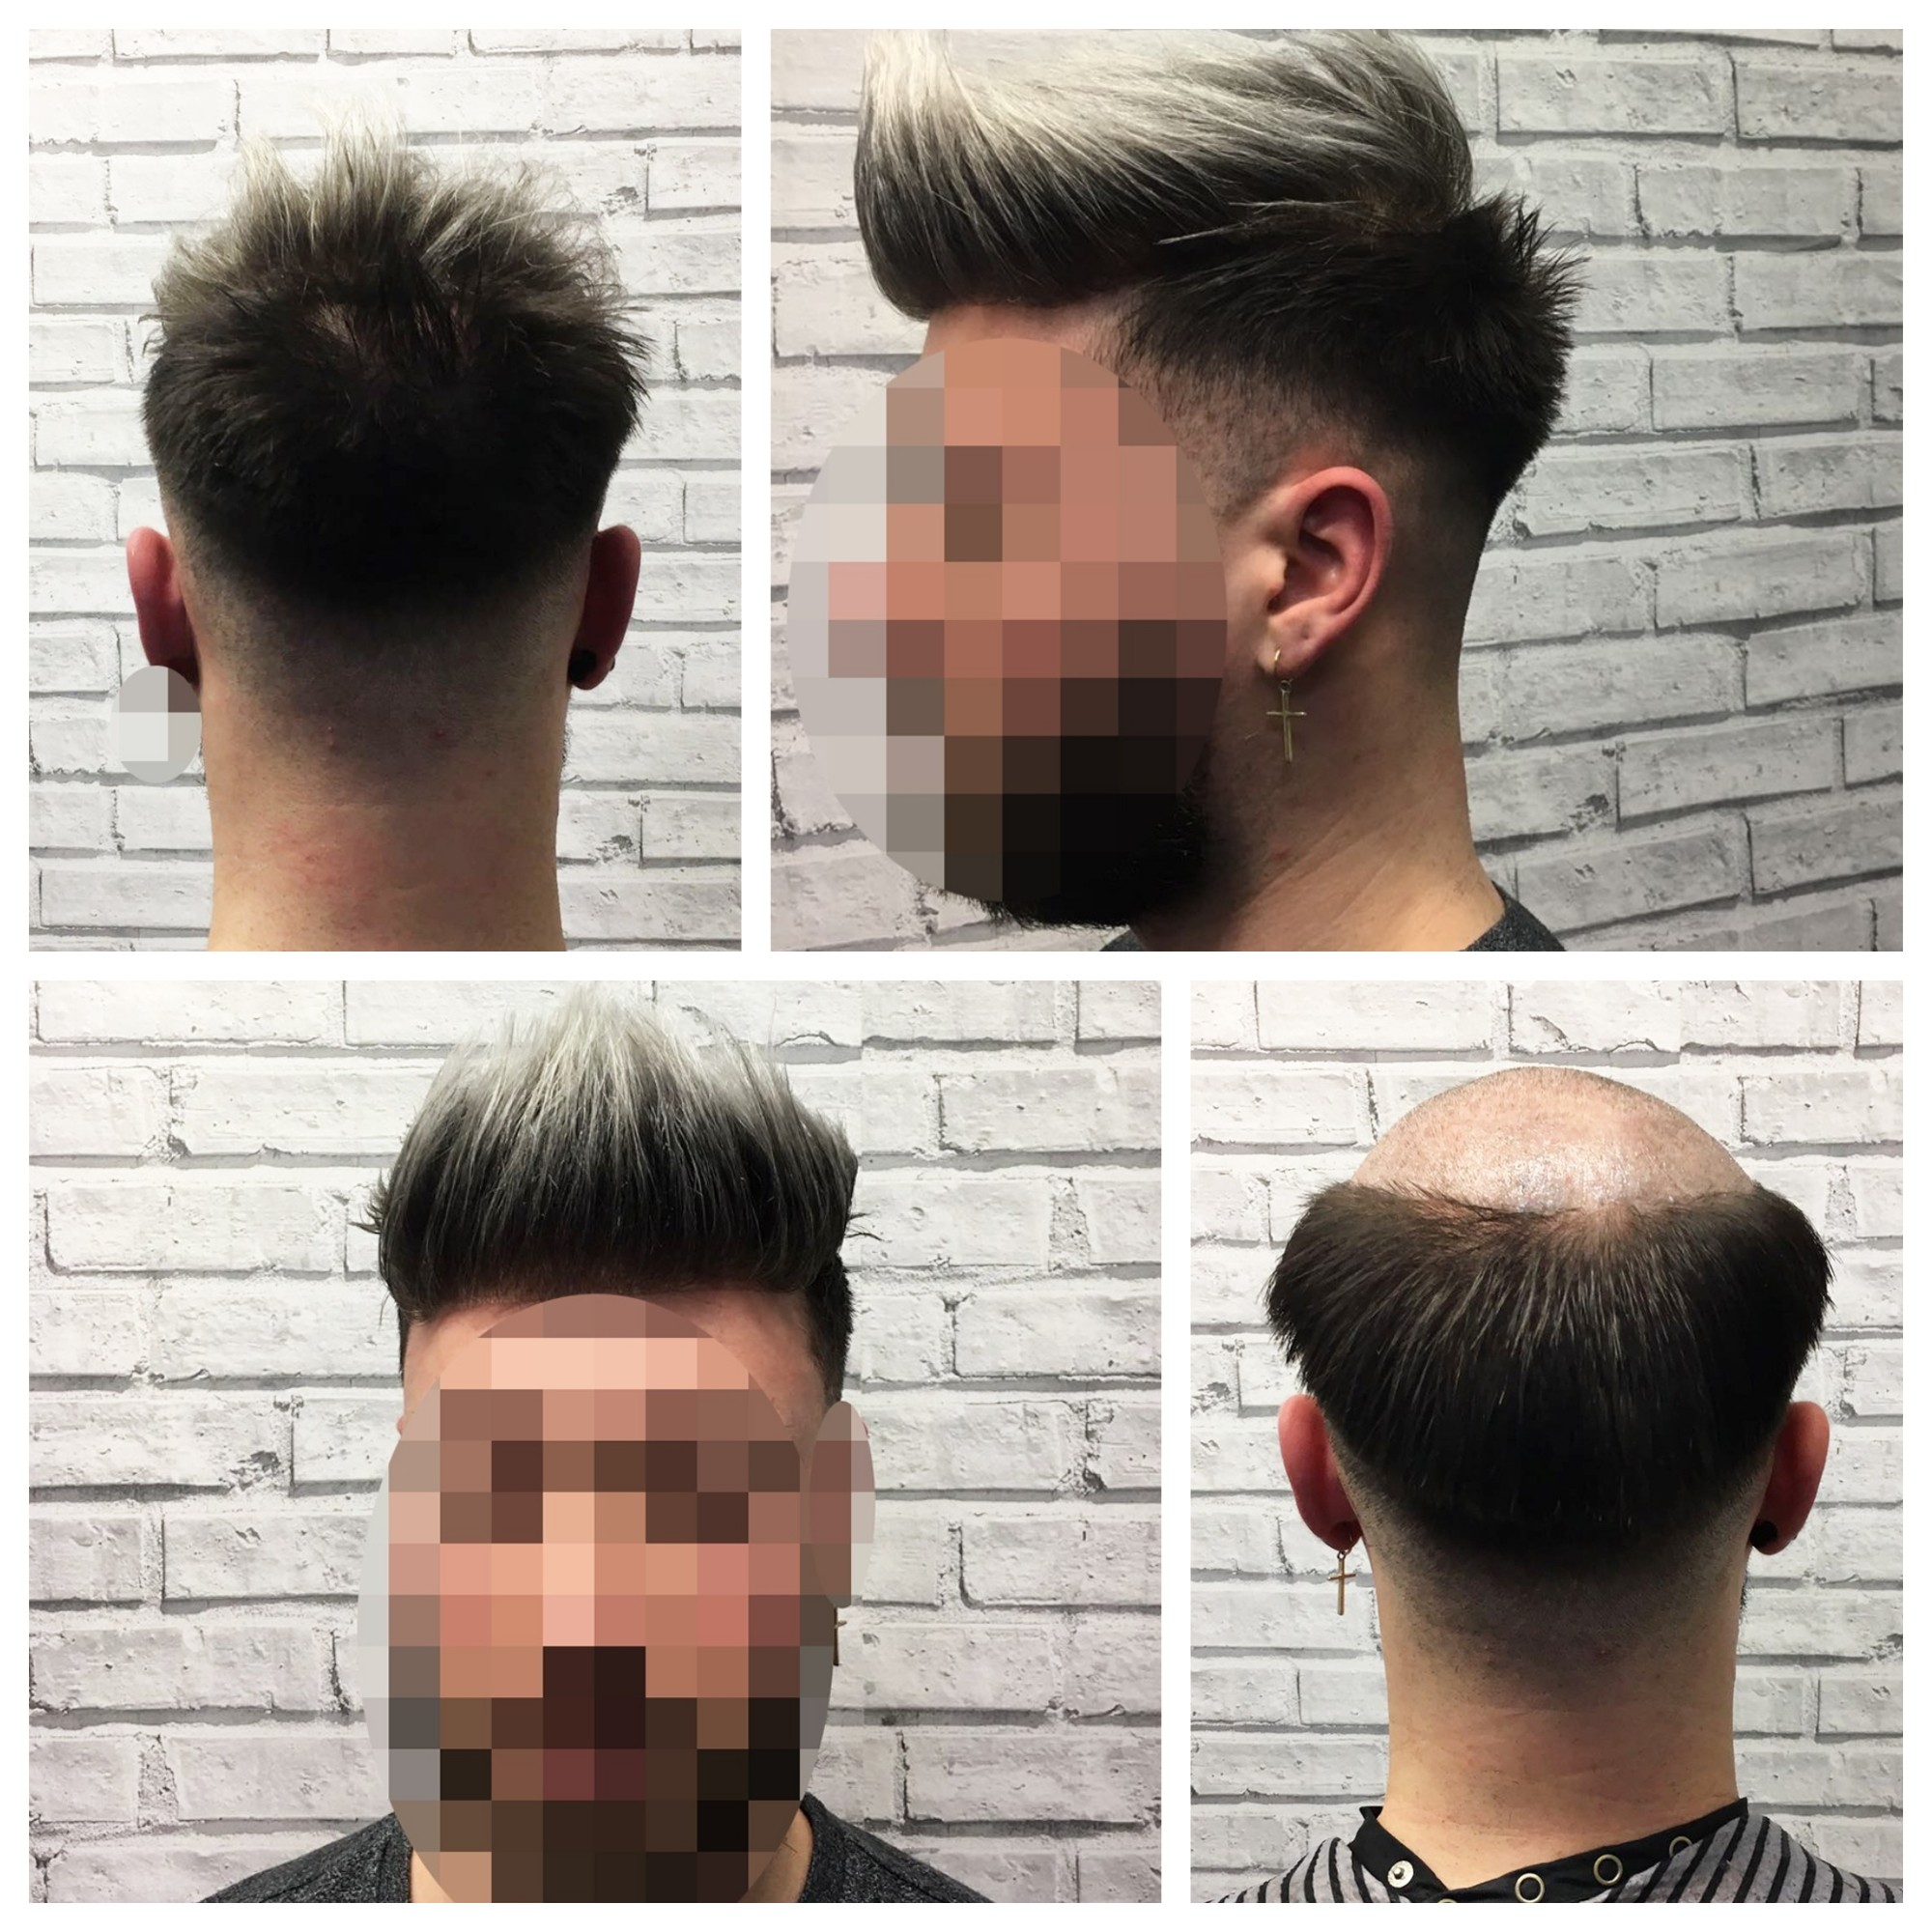 Non surgical hair replacement cost uk